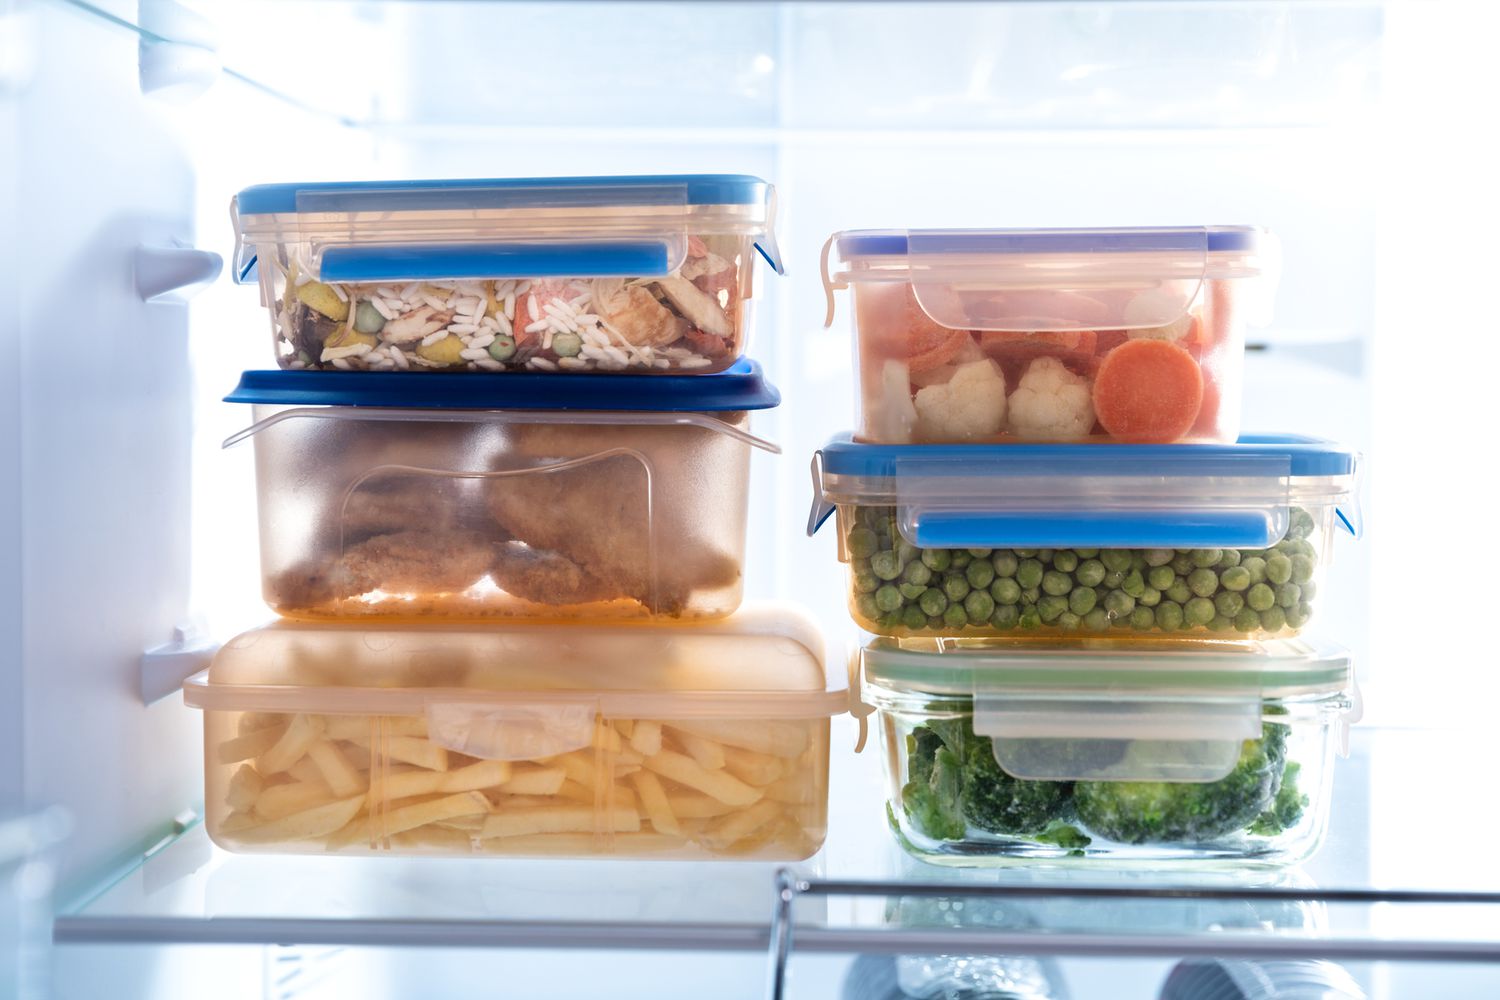 leftover food in plastic containers inside refrigerator